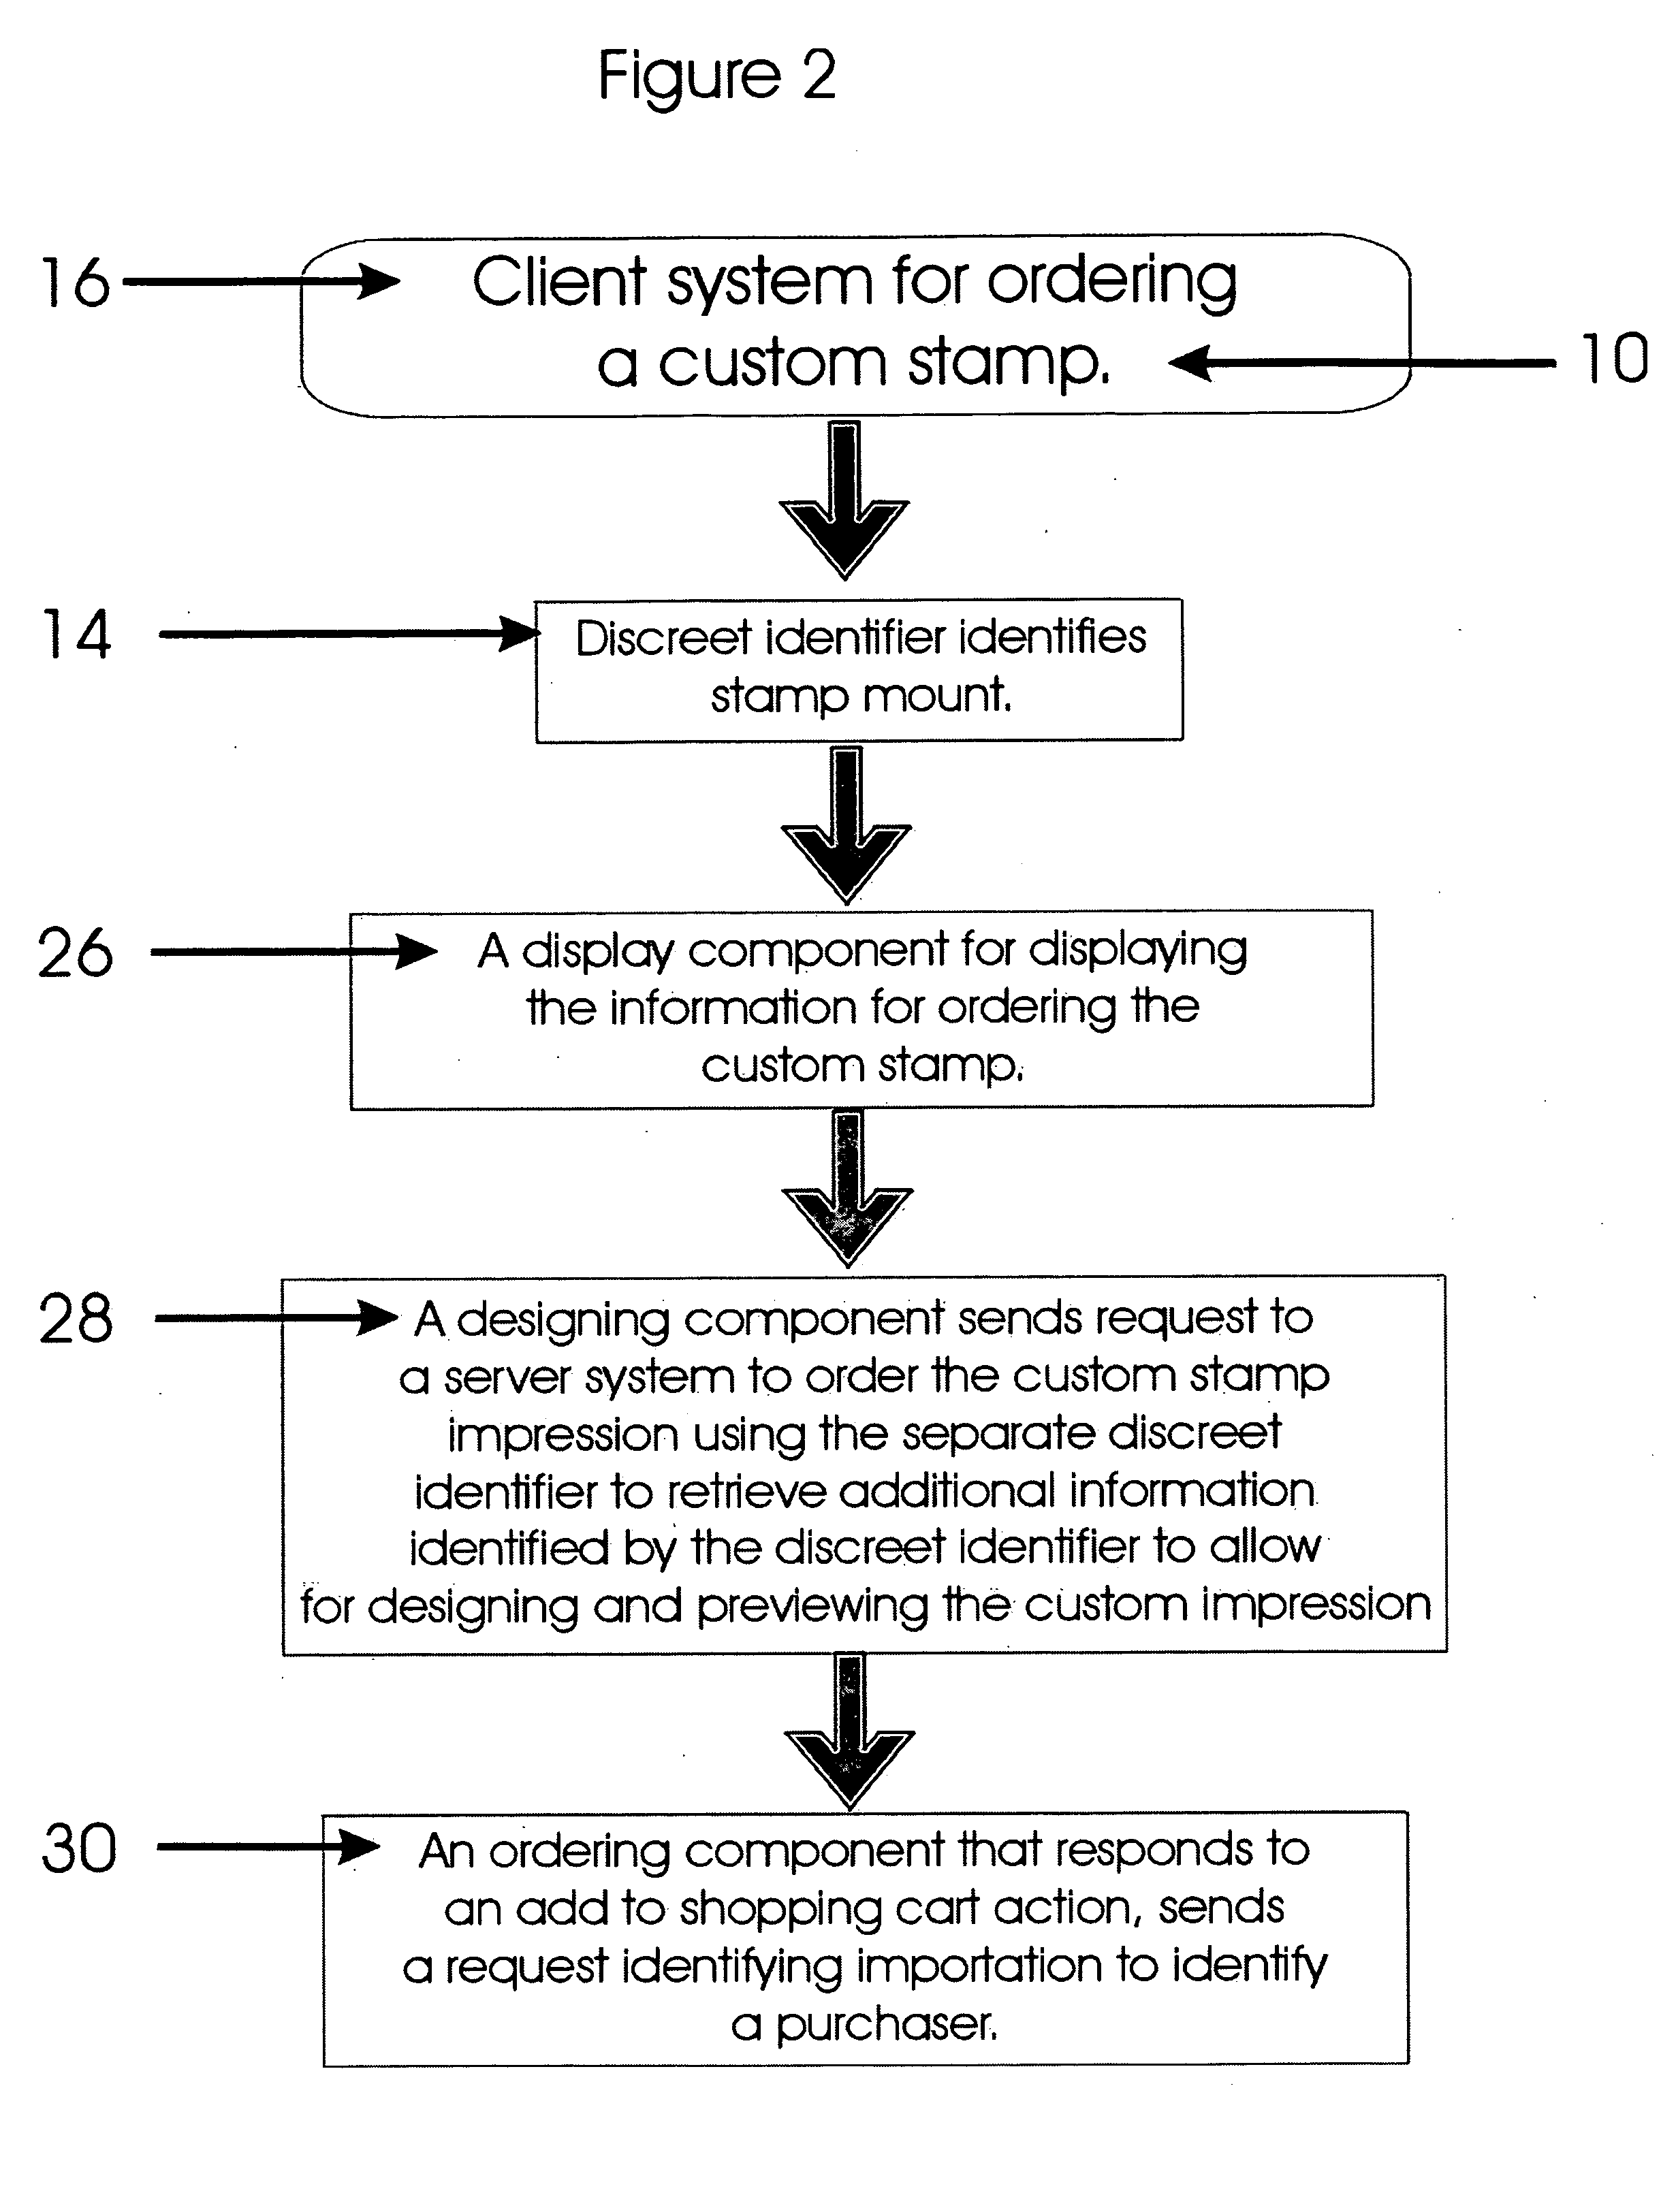 Method of placing an order for a custom stamp